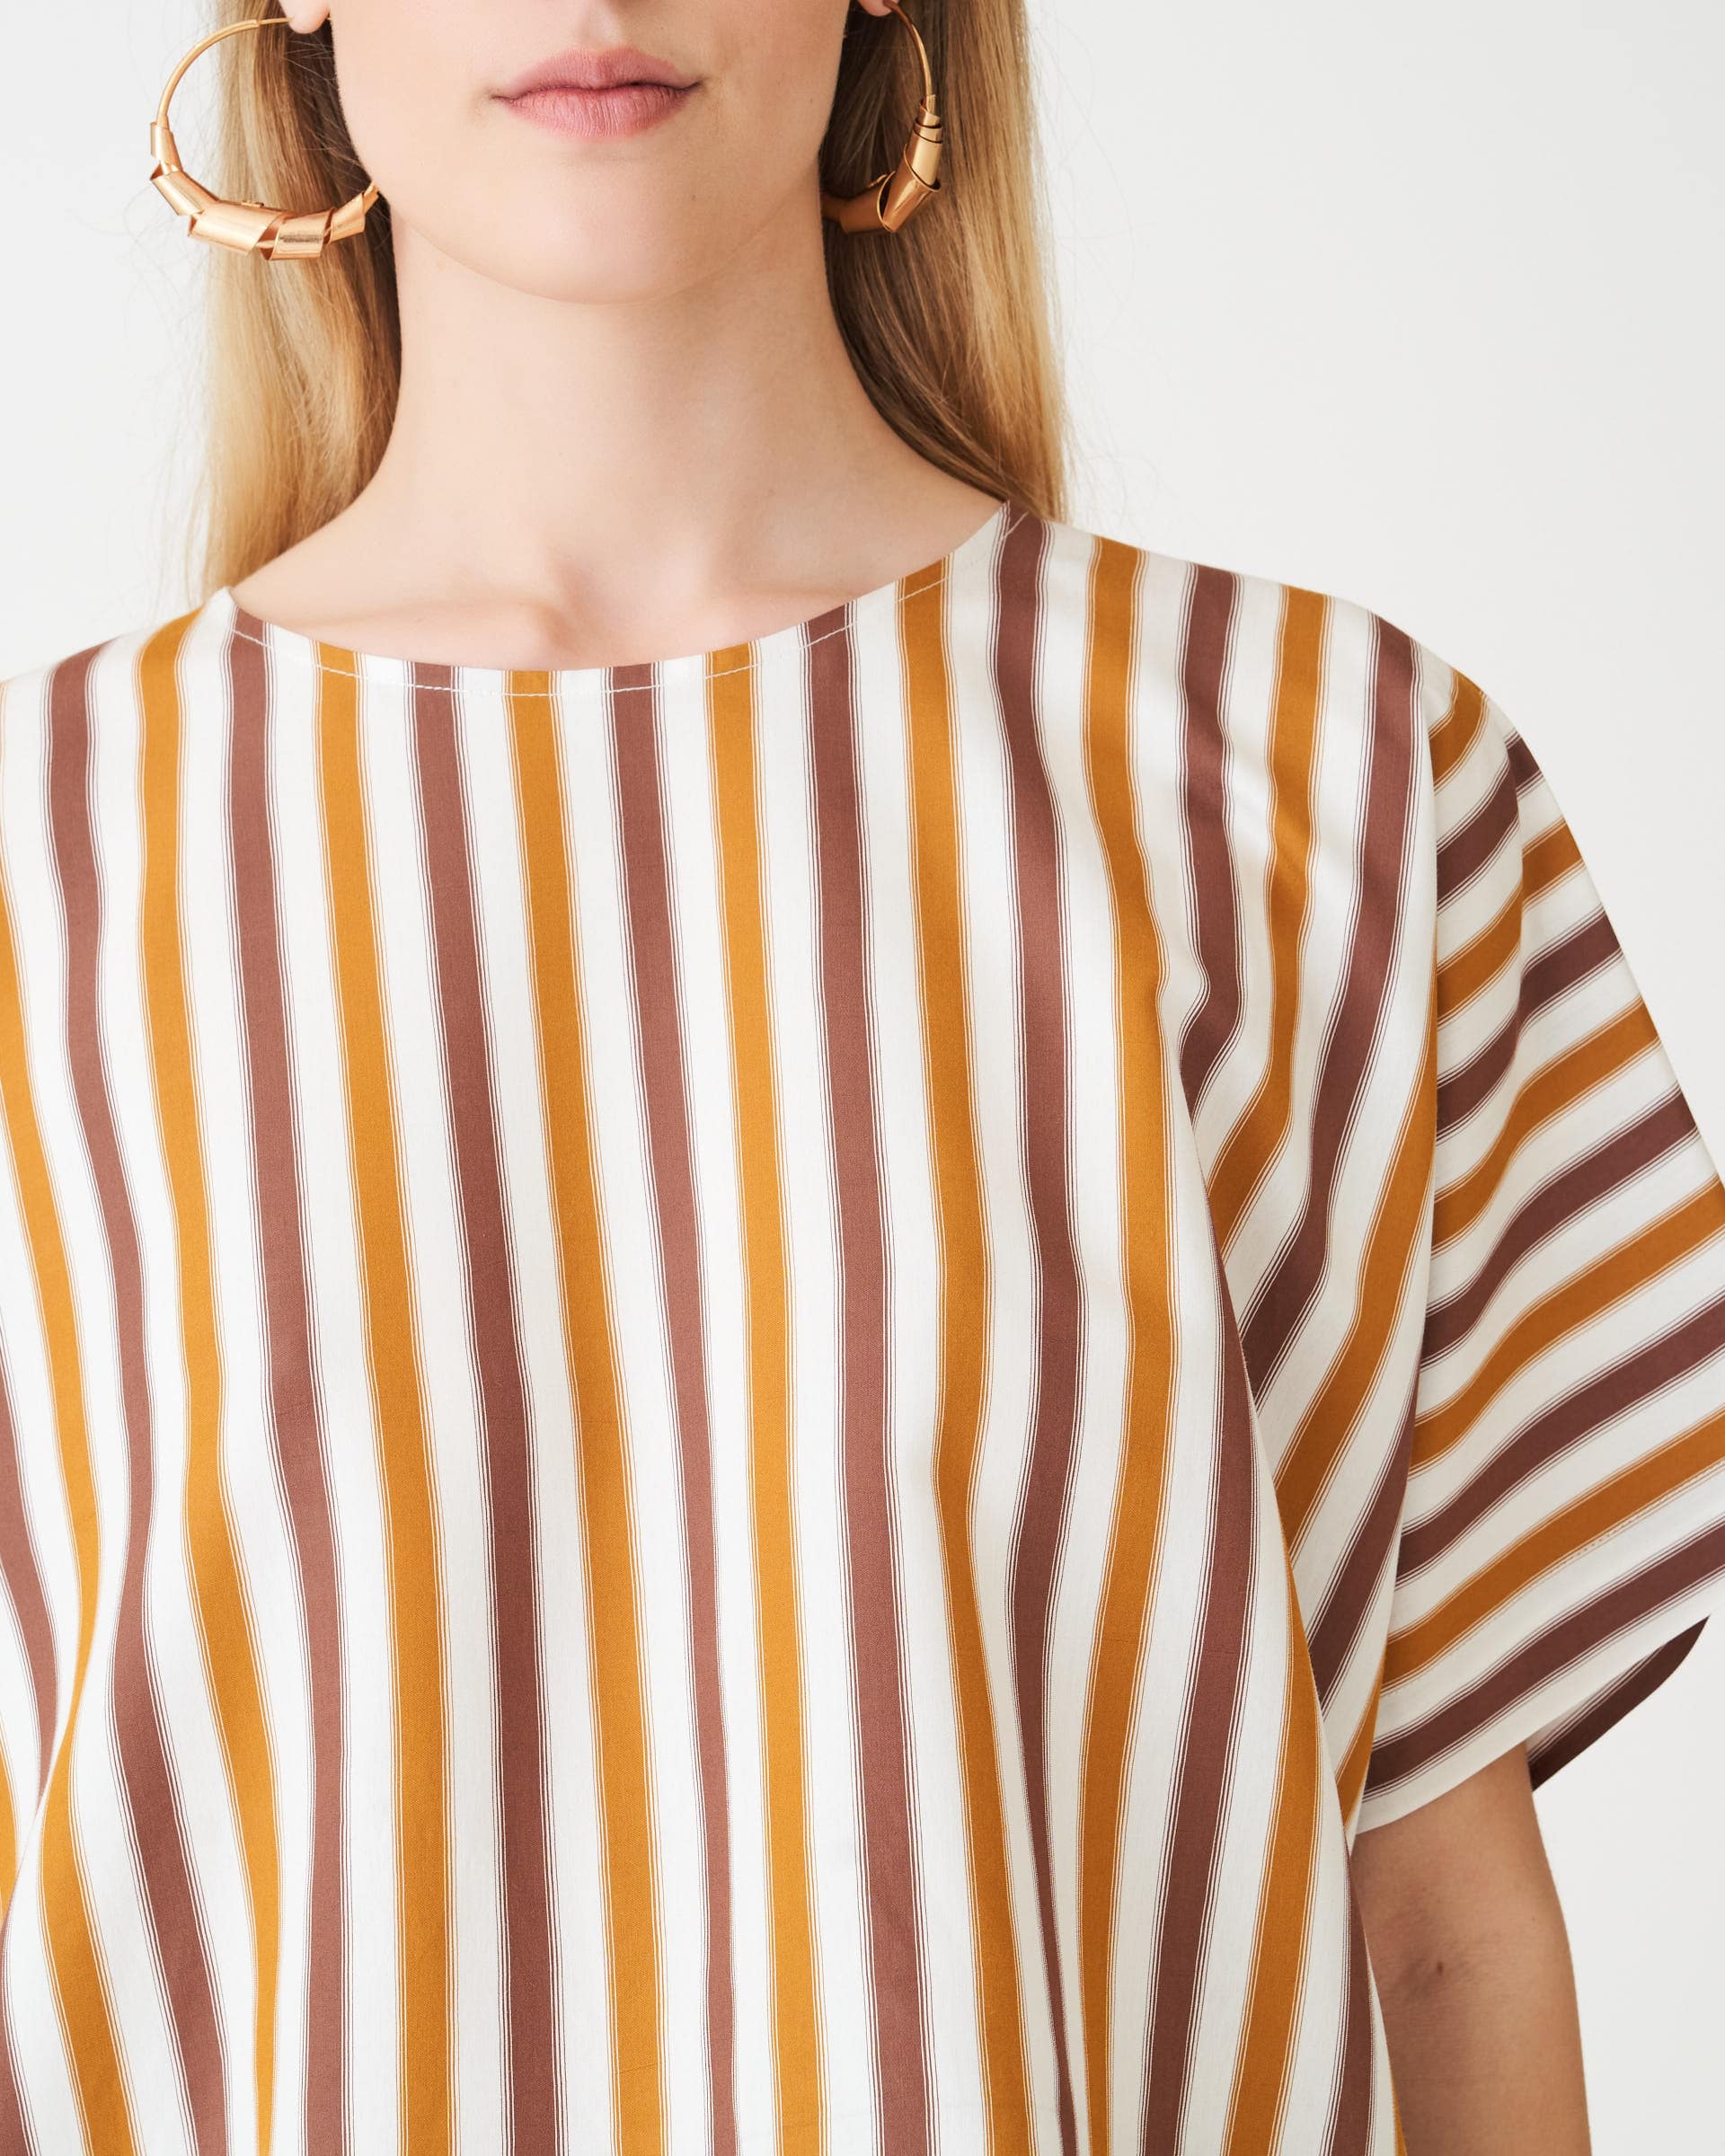 The Market Store | Striped T-shirt